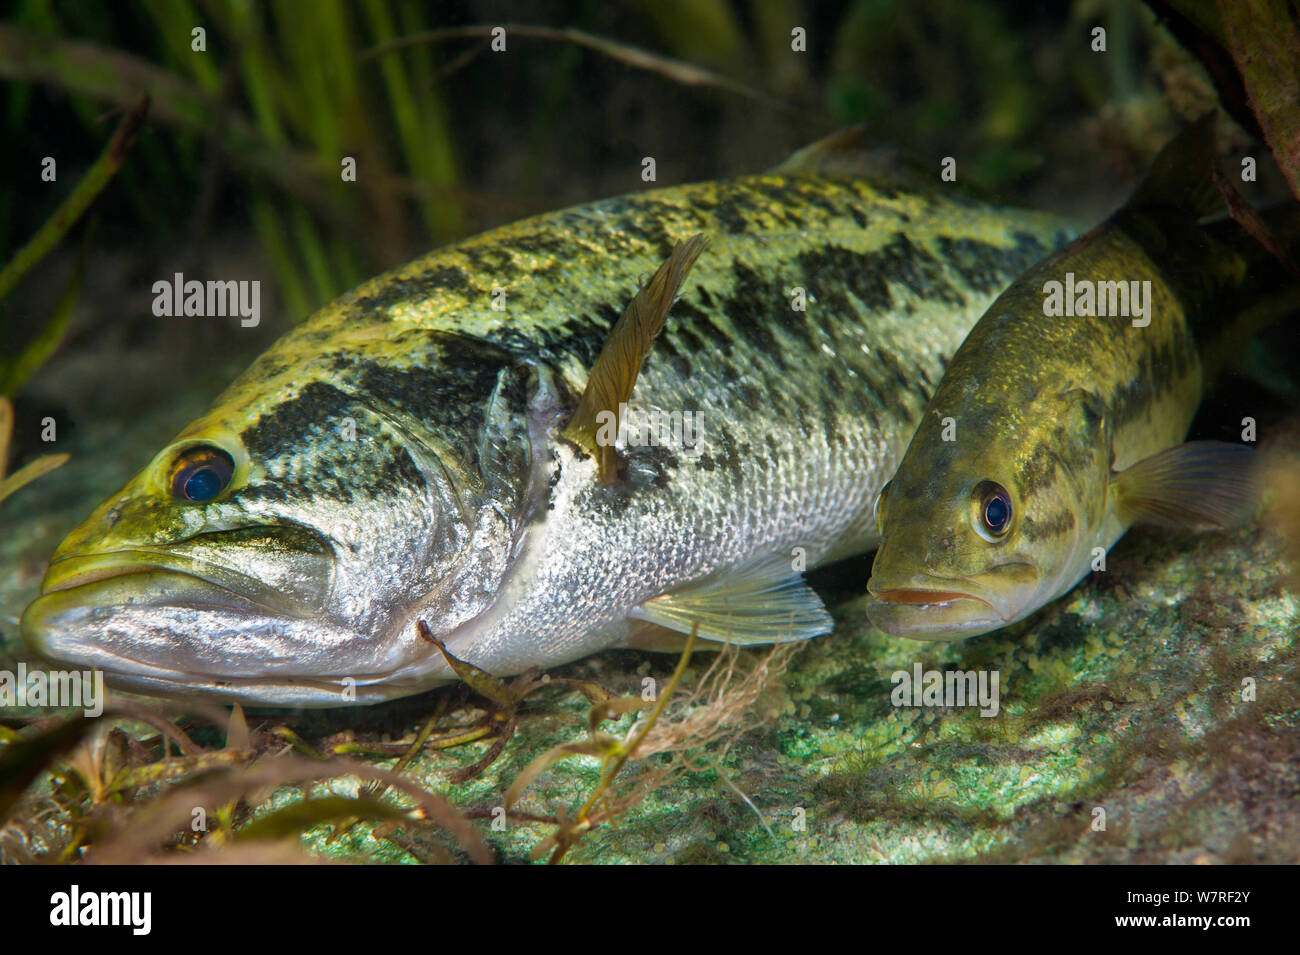 Pair of largemouth bass (Micropterus salmoides) spawning. The female (the smaller fish) has just released her eggs, which are visible on the riverbed, while the male (the larger fish) has turned on his side to fertilise them. Rainbow River, Florida, United States of America. Stock Photo